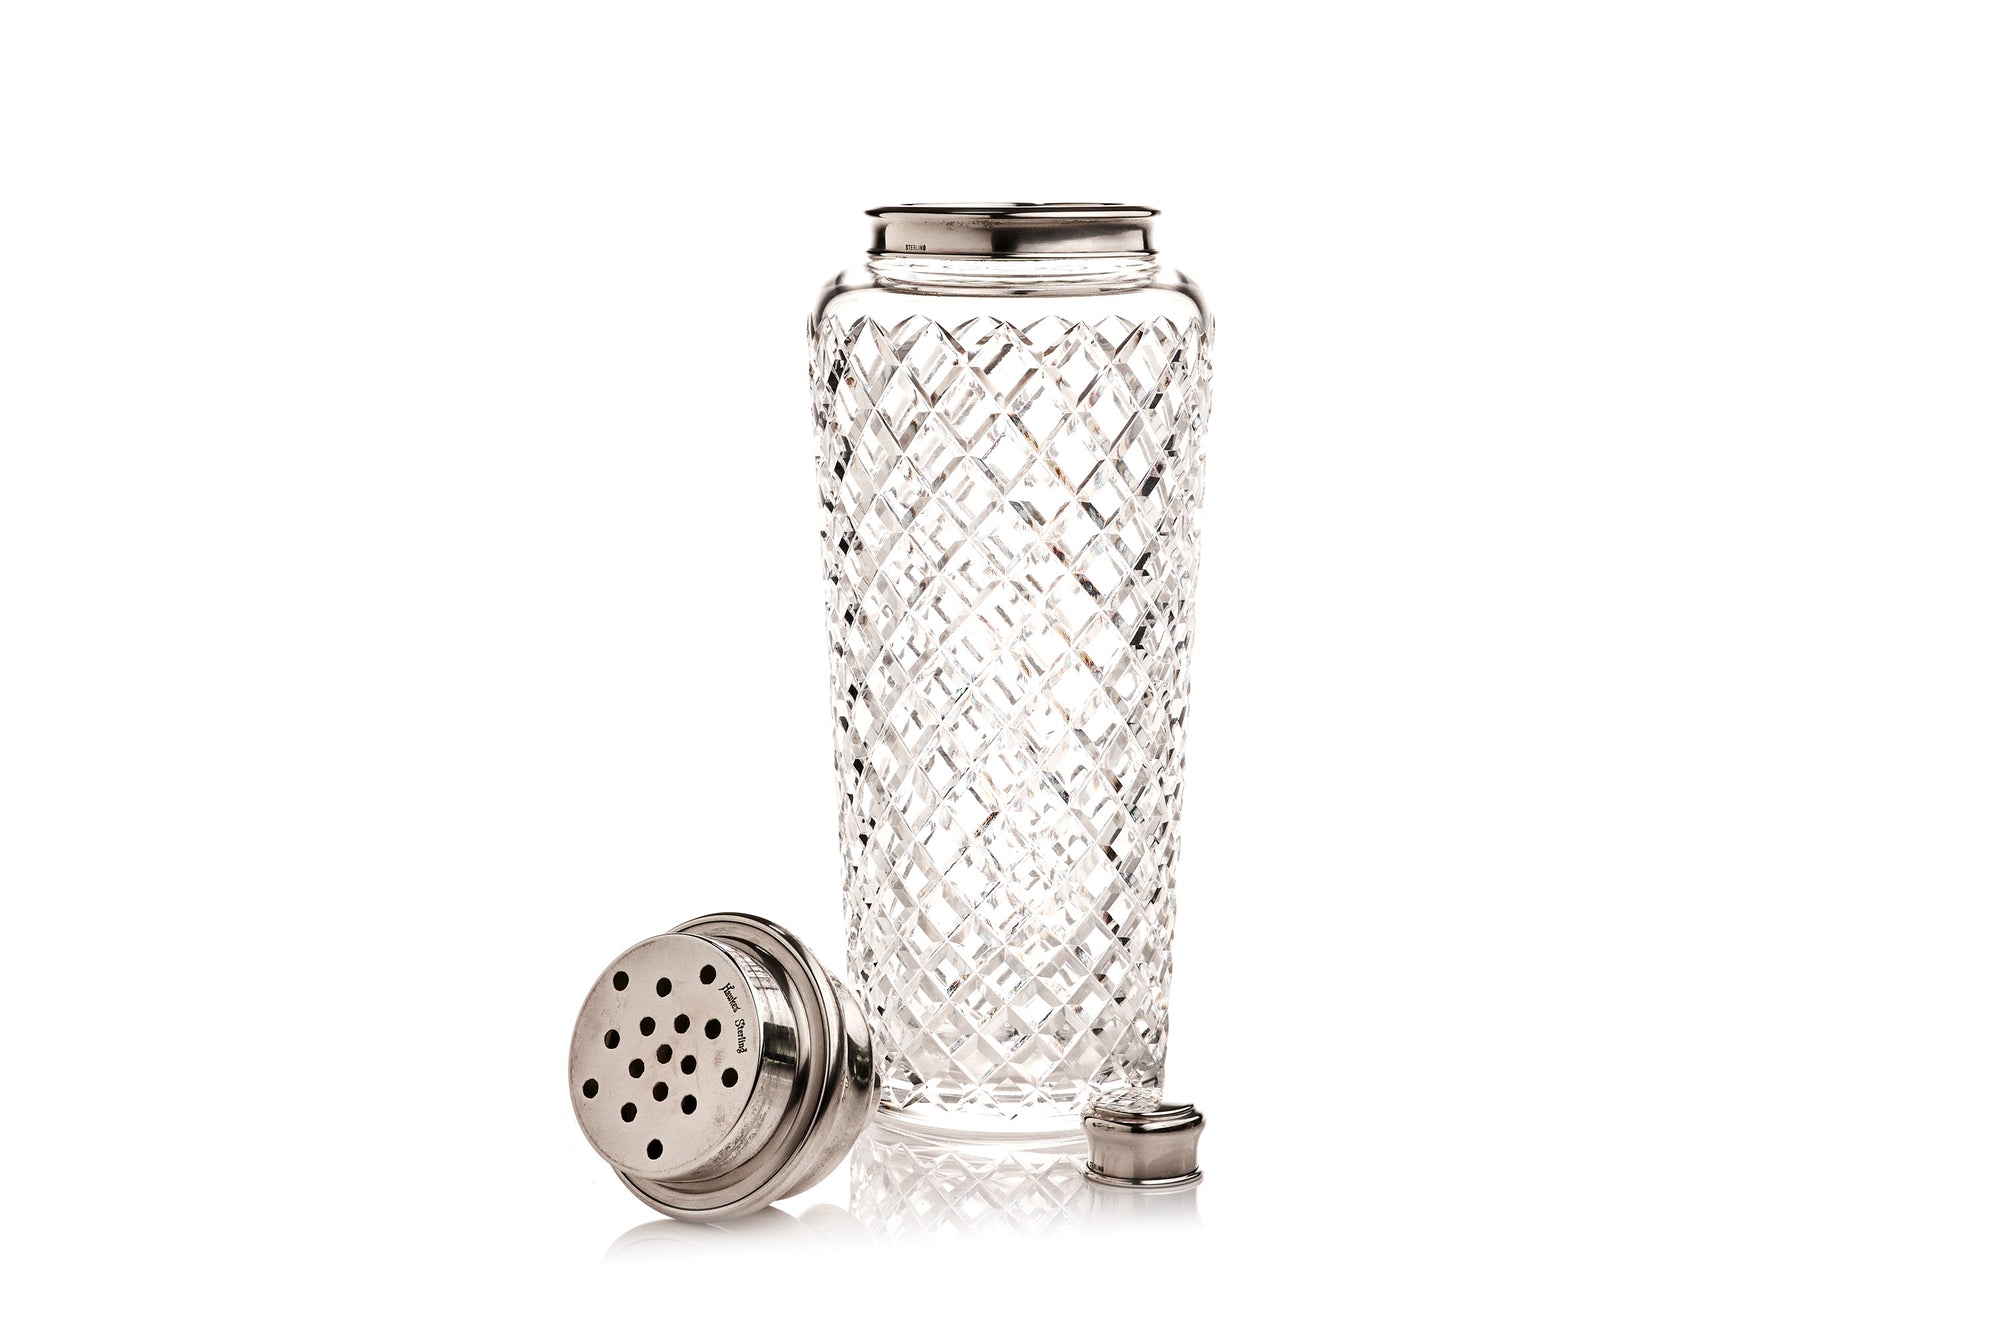 Hawkes Sterling Cocktail Shaker, Giant